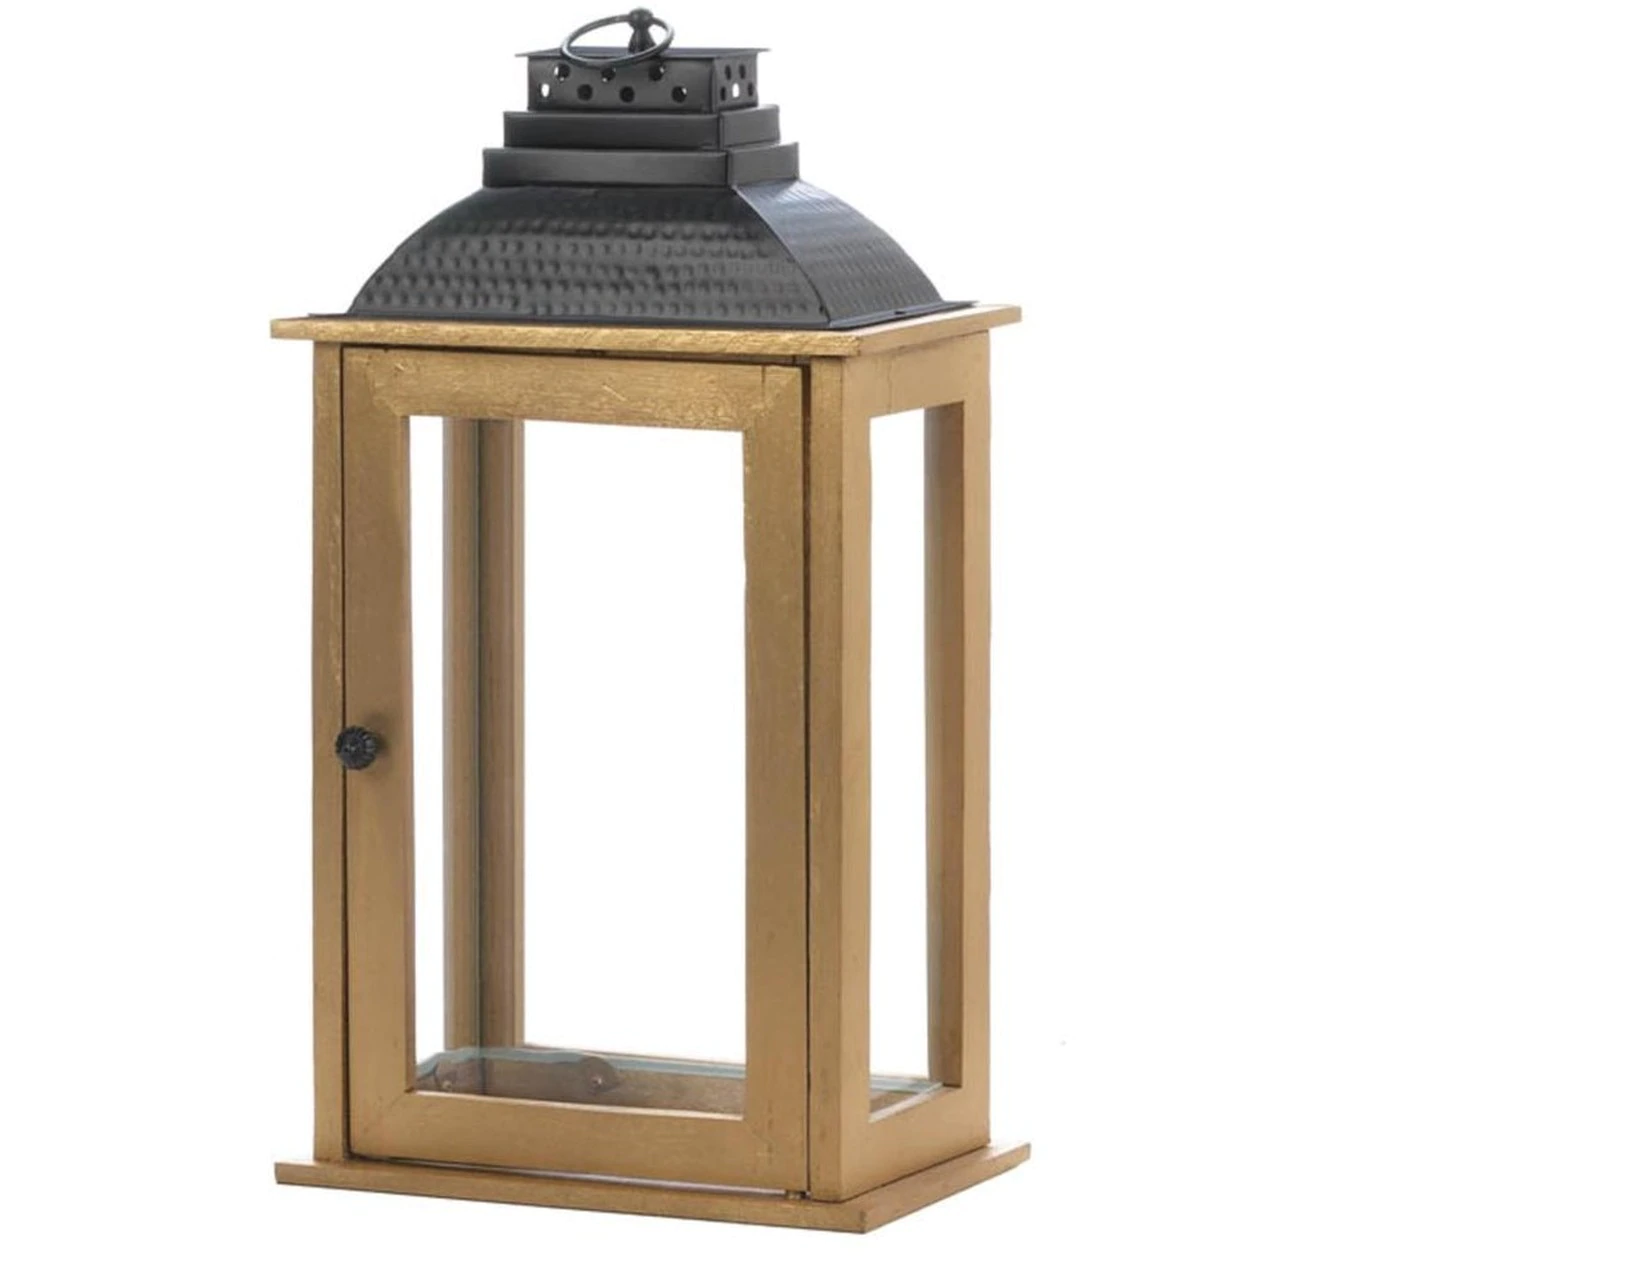 Rectangular Wood Candle Lantern with Black Metal Top - 19 inches